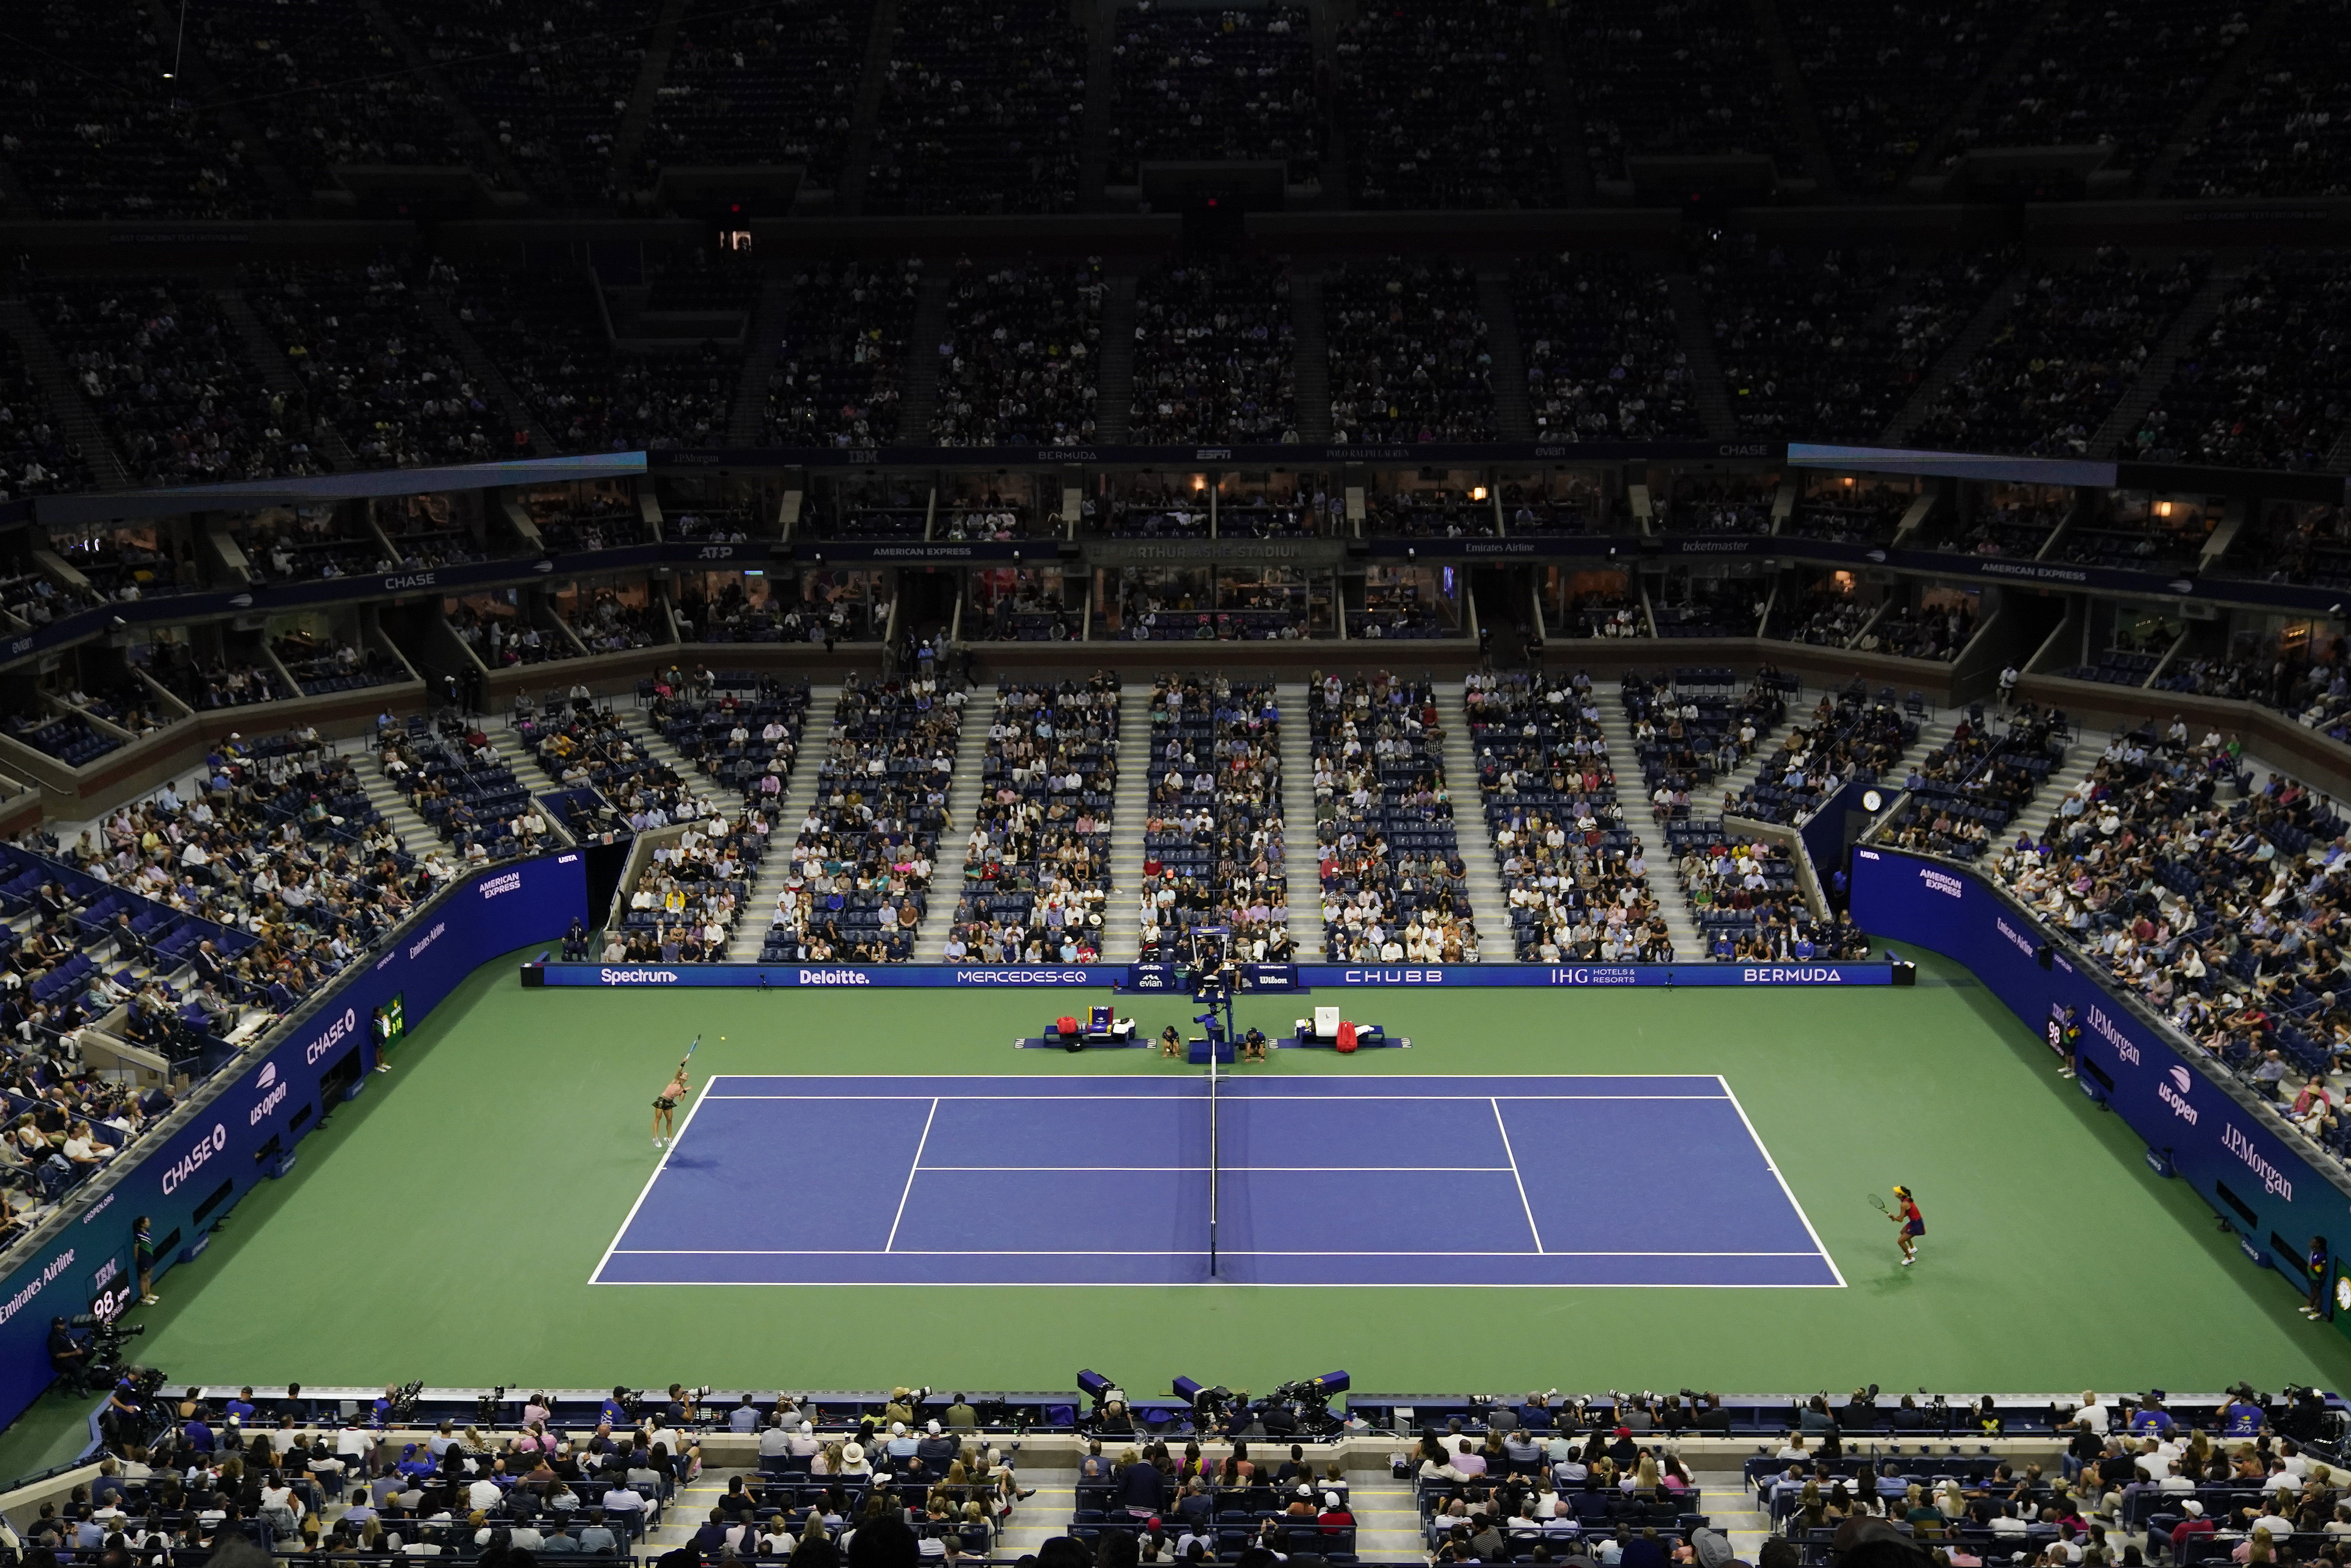 us open womens final live streaming free